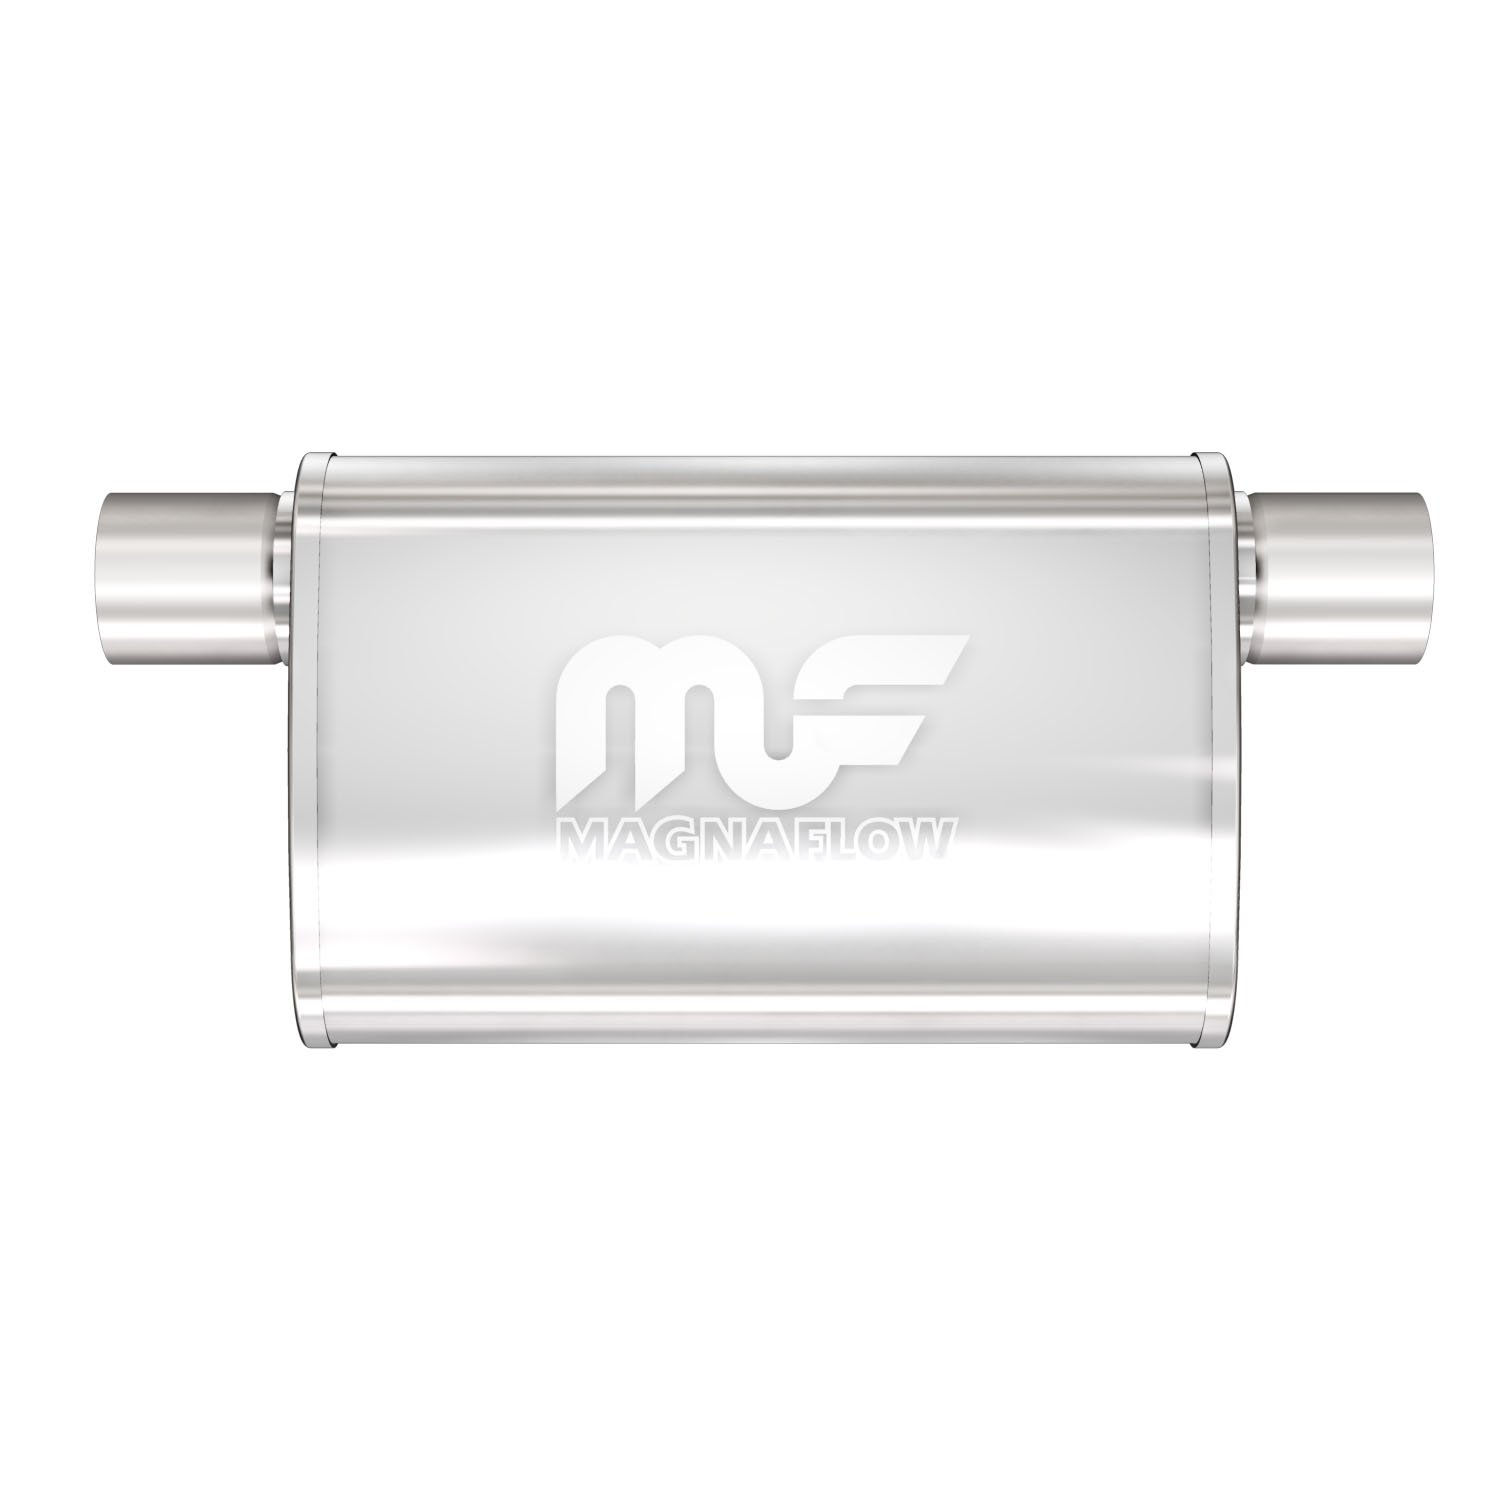 4" x 9" Oval Muffler, Offset In/Offset Out: 2.5", Body Length: 14", Overall Length: 20", Core Size: 2.5" [Brushed Finish]